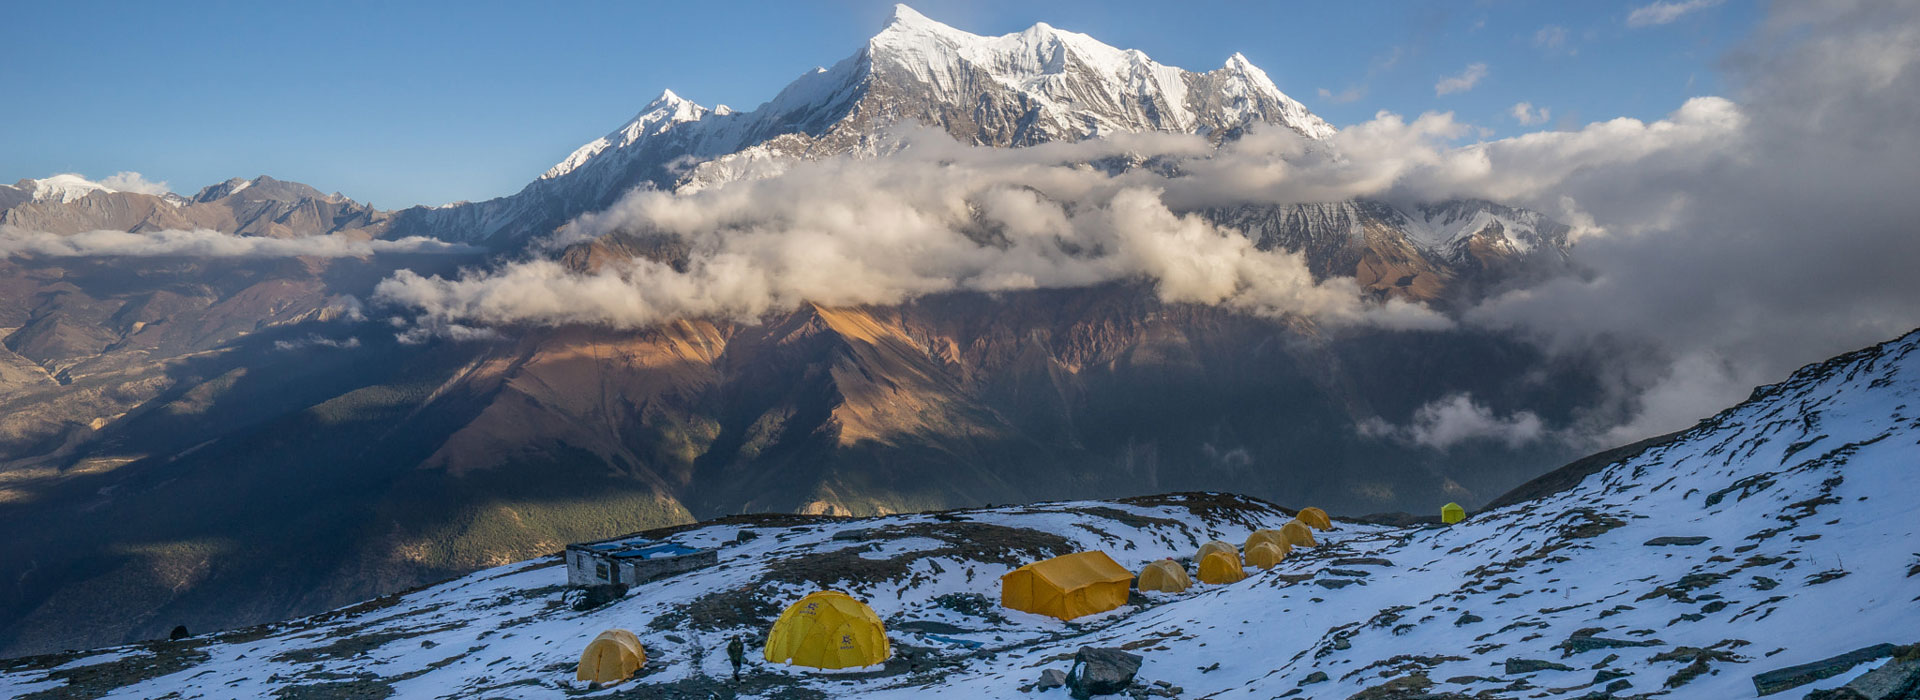 Permits Required for Langtang Trek